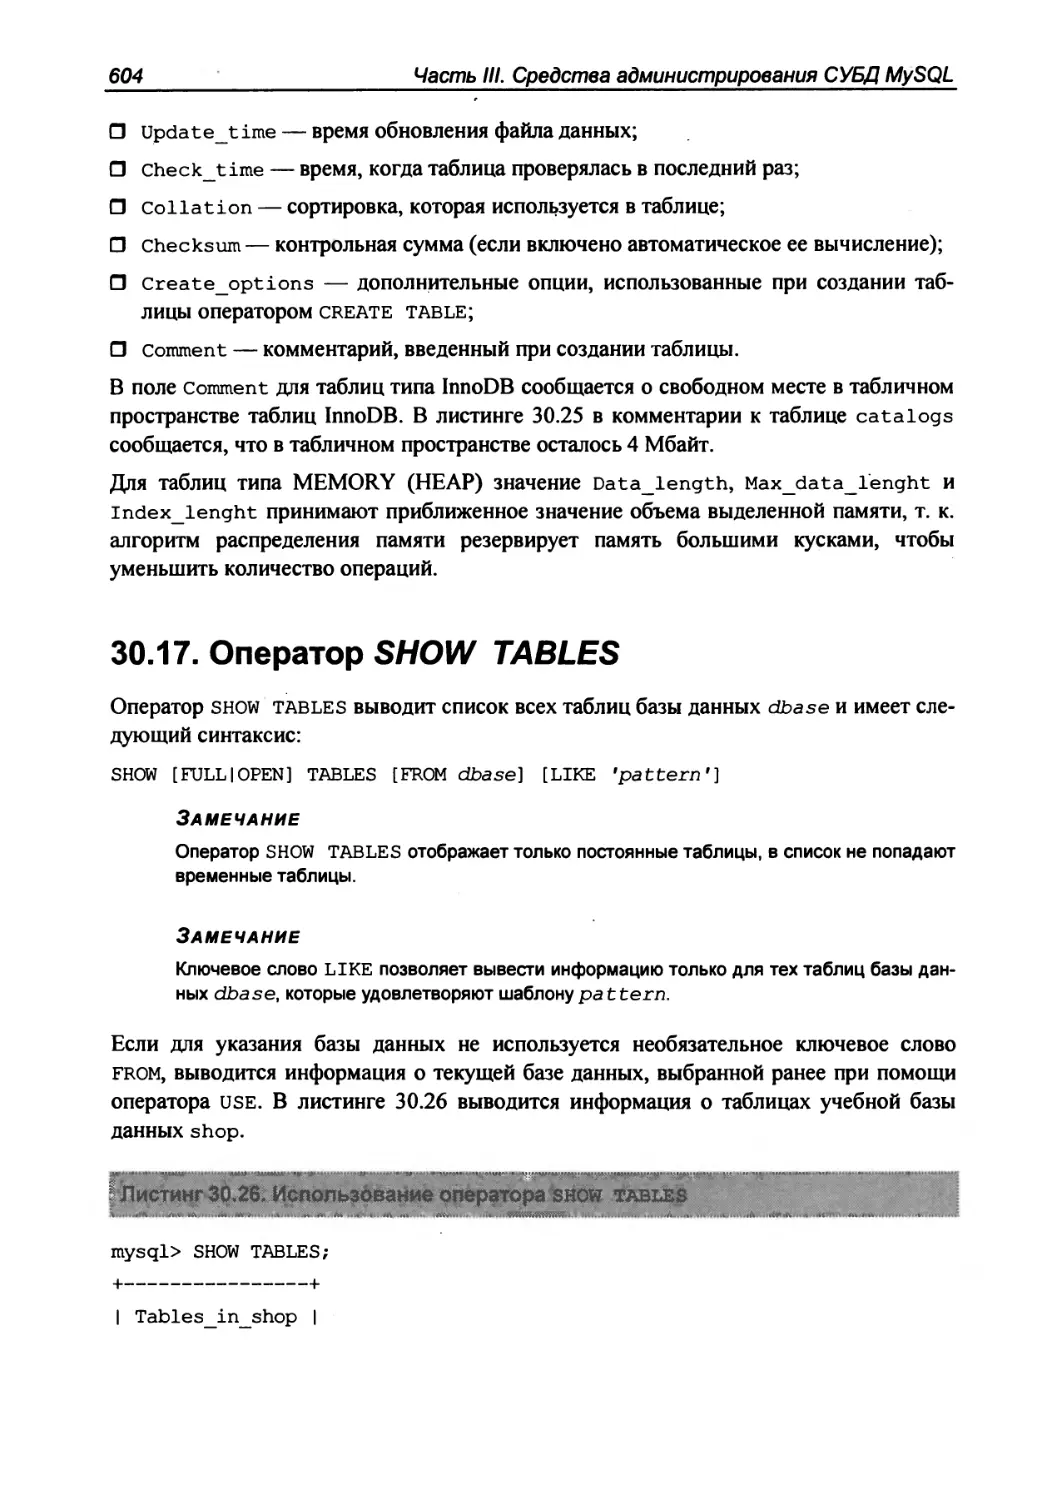 30.17. Оператор SHOW TABLES